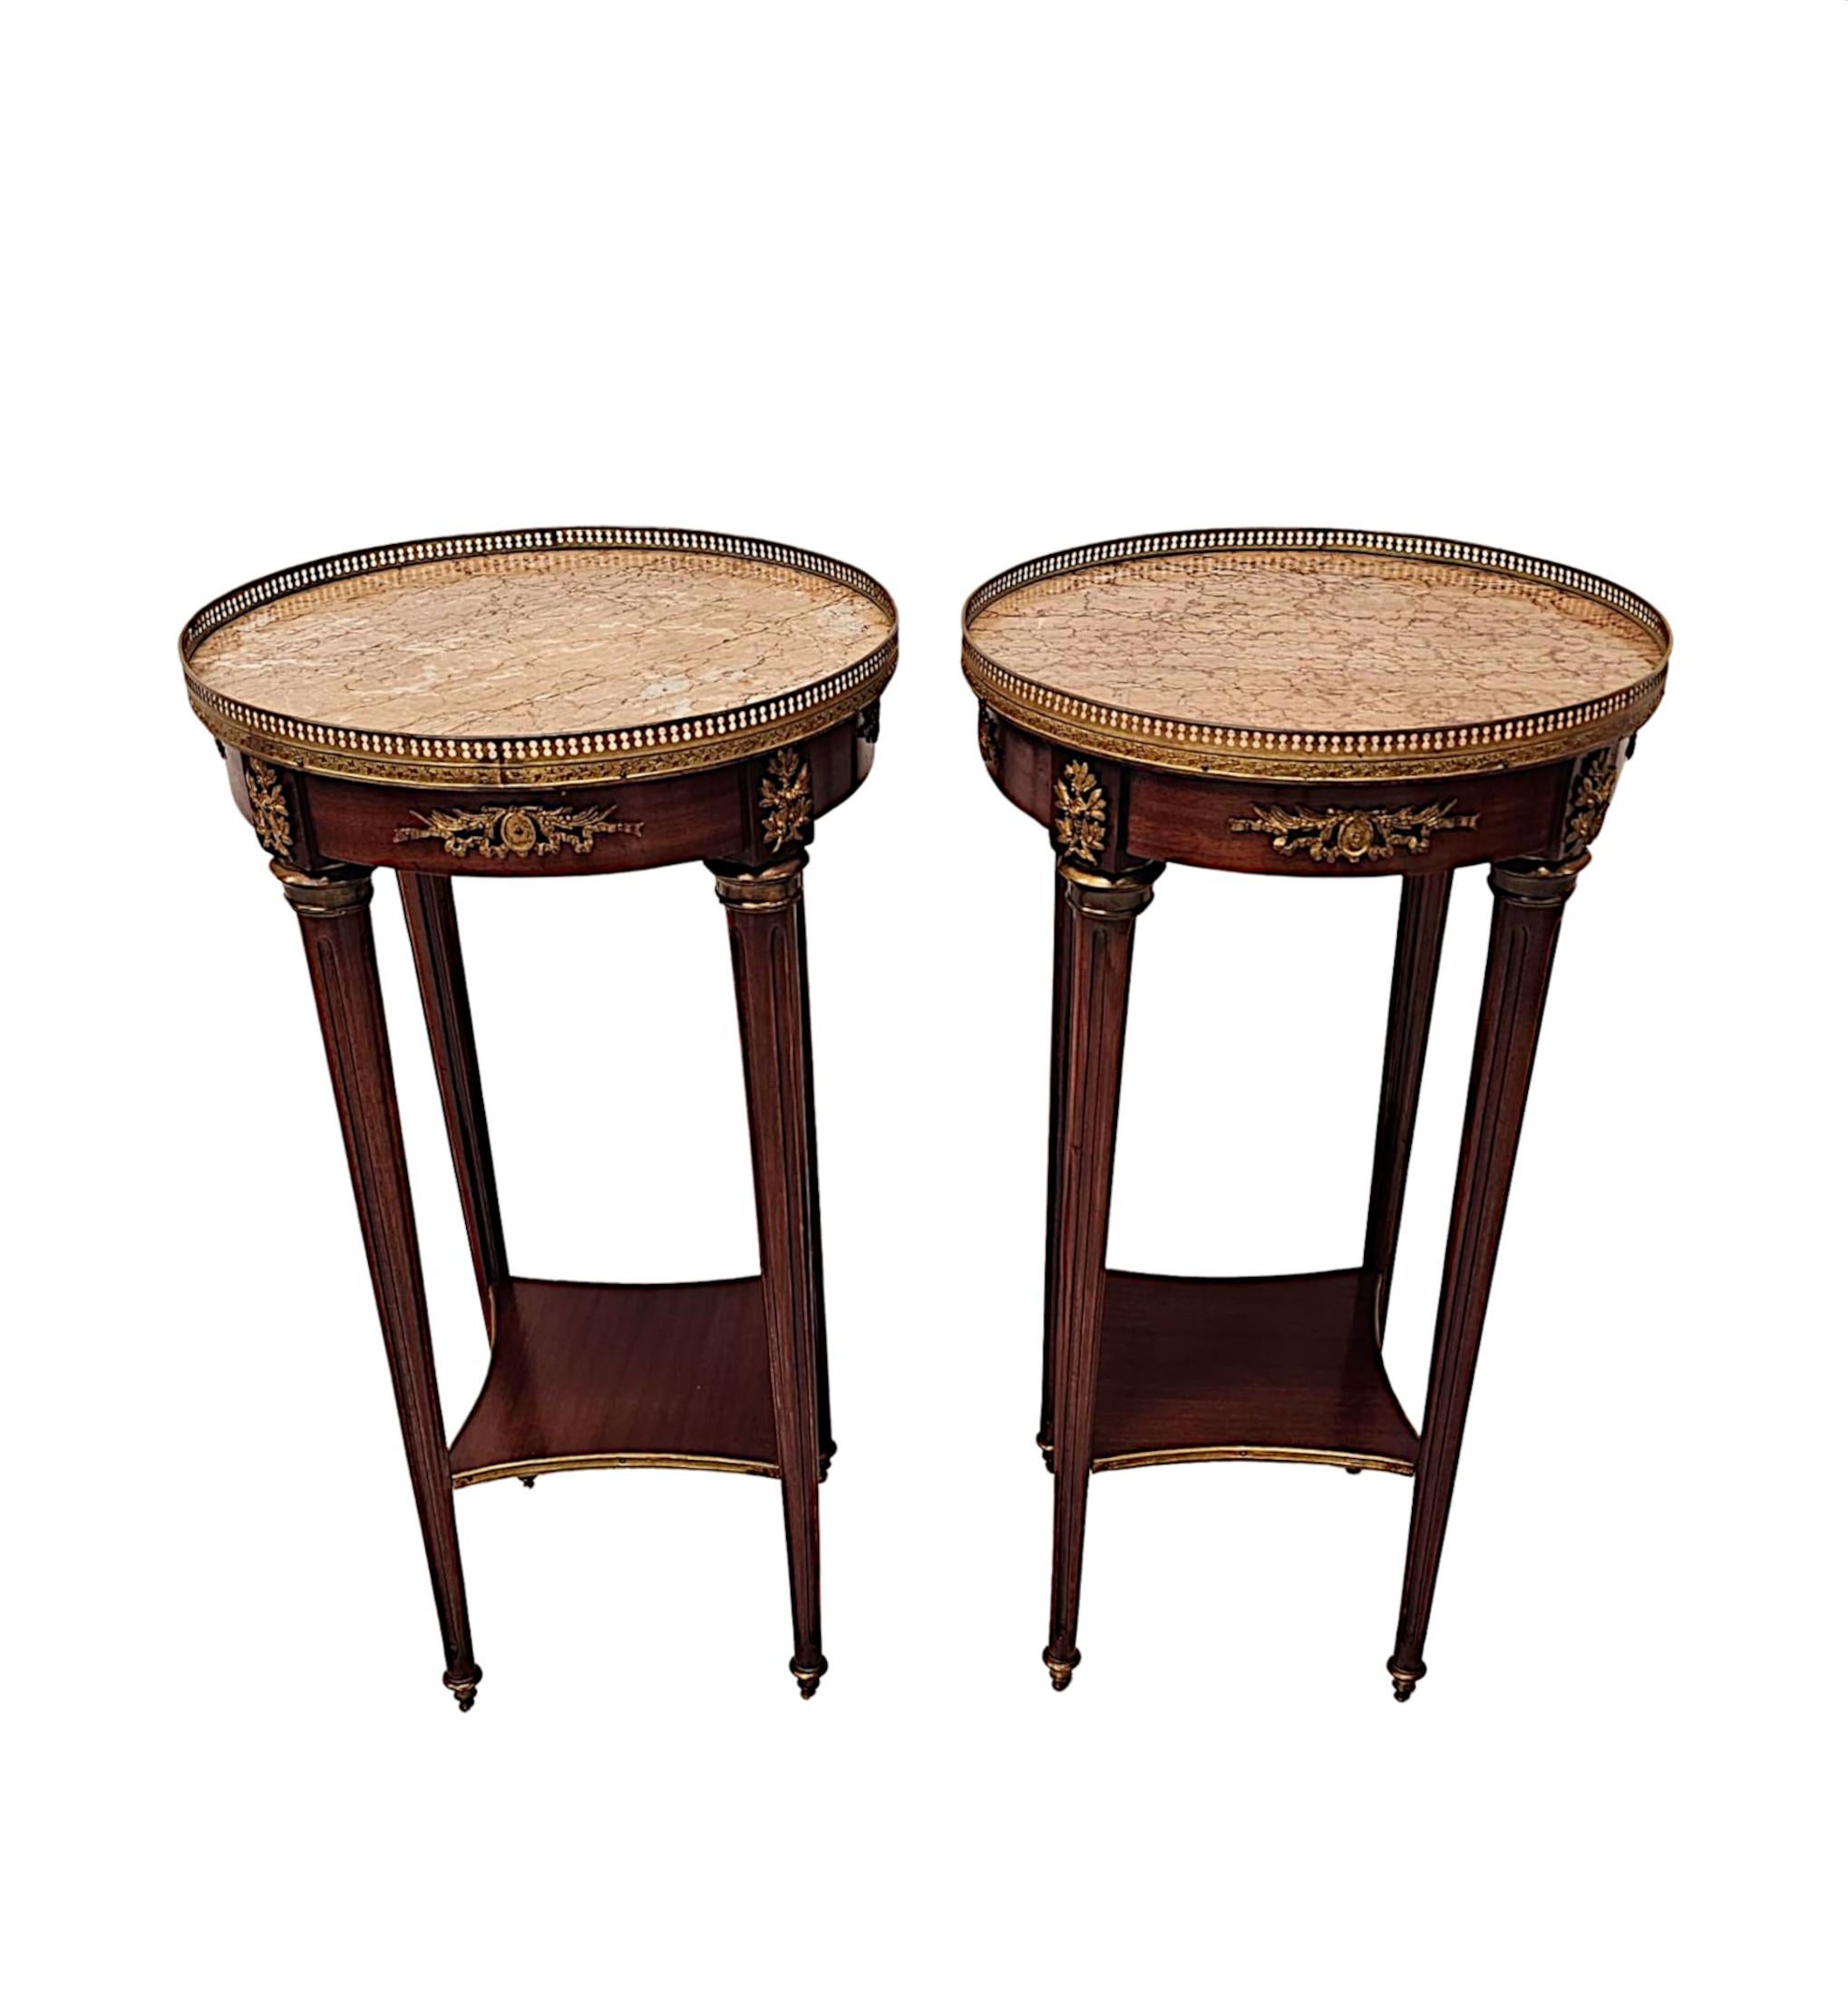 A very rare pair of early 20th Century finely carved well figured mahogany marble top lamp or side tables of exceptional quality, with rich patination, grain and ormolu mounted throughout.  The gorgeous moulded Emperador marble top of circular form